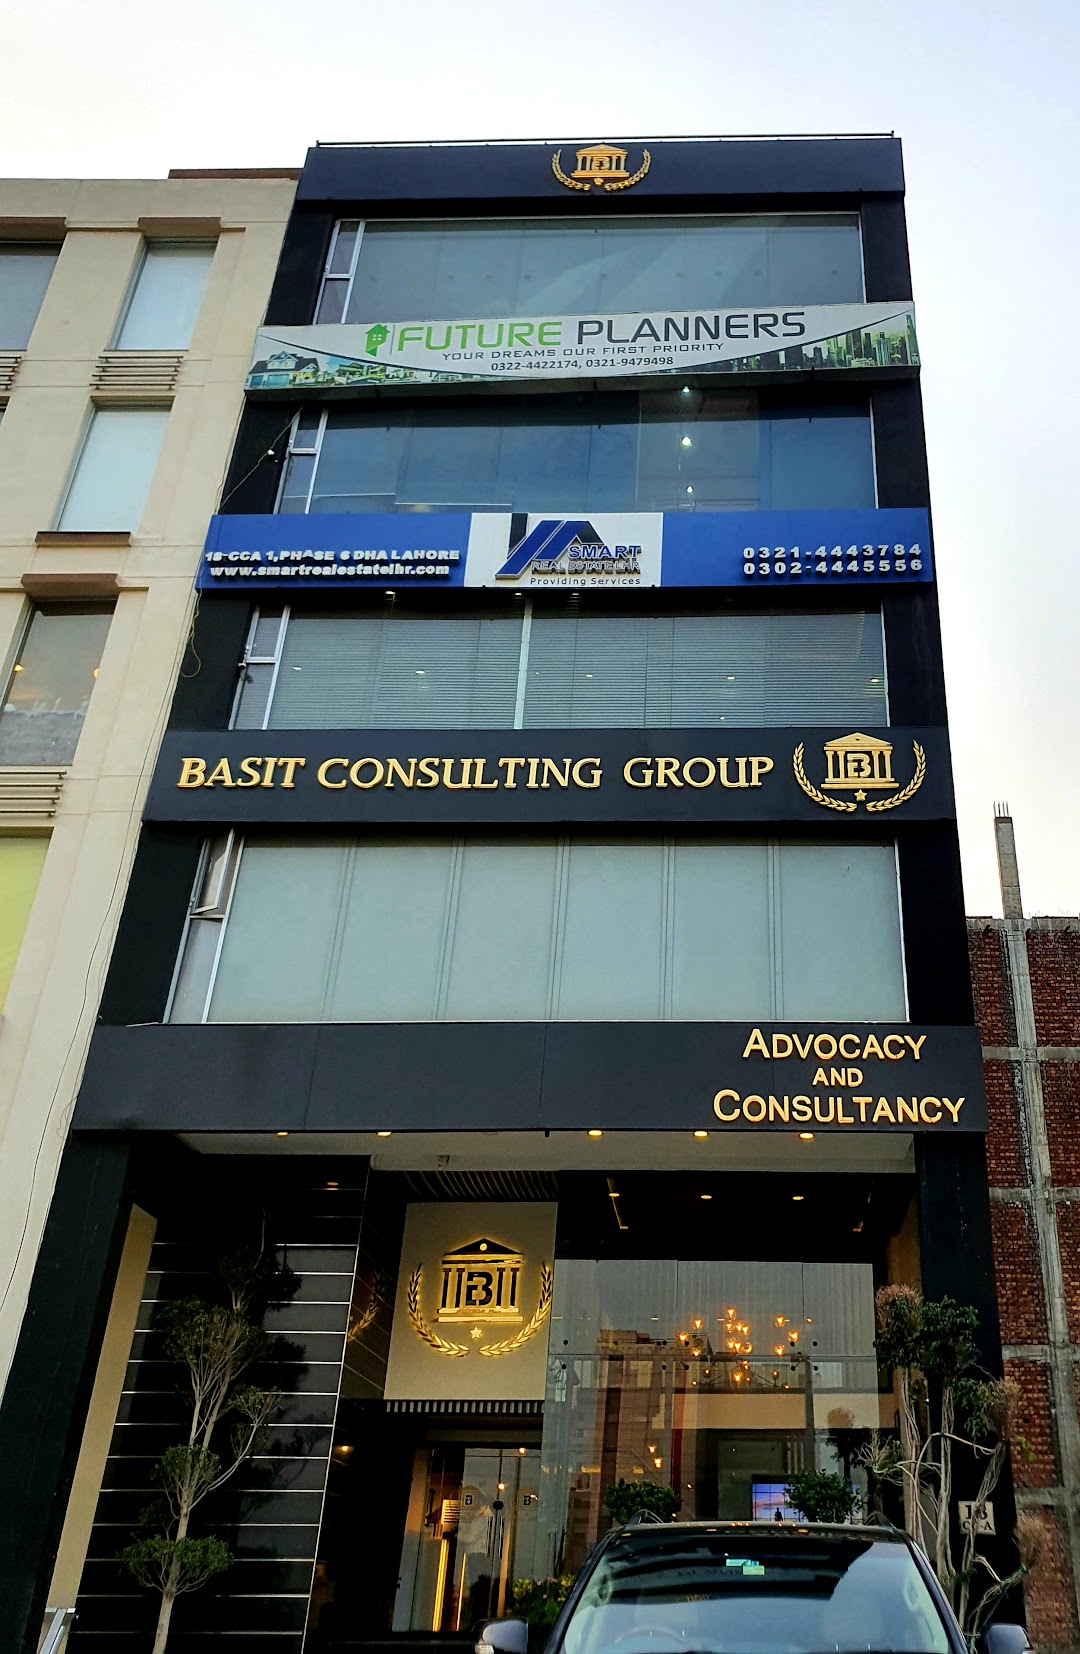 Basit Consulting Group